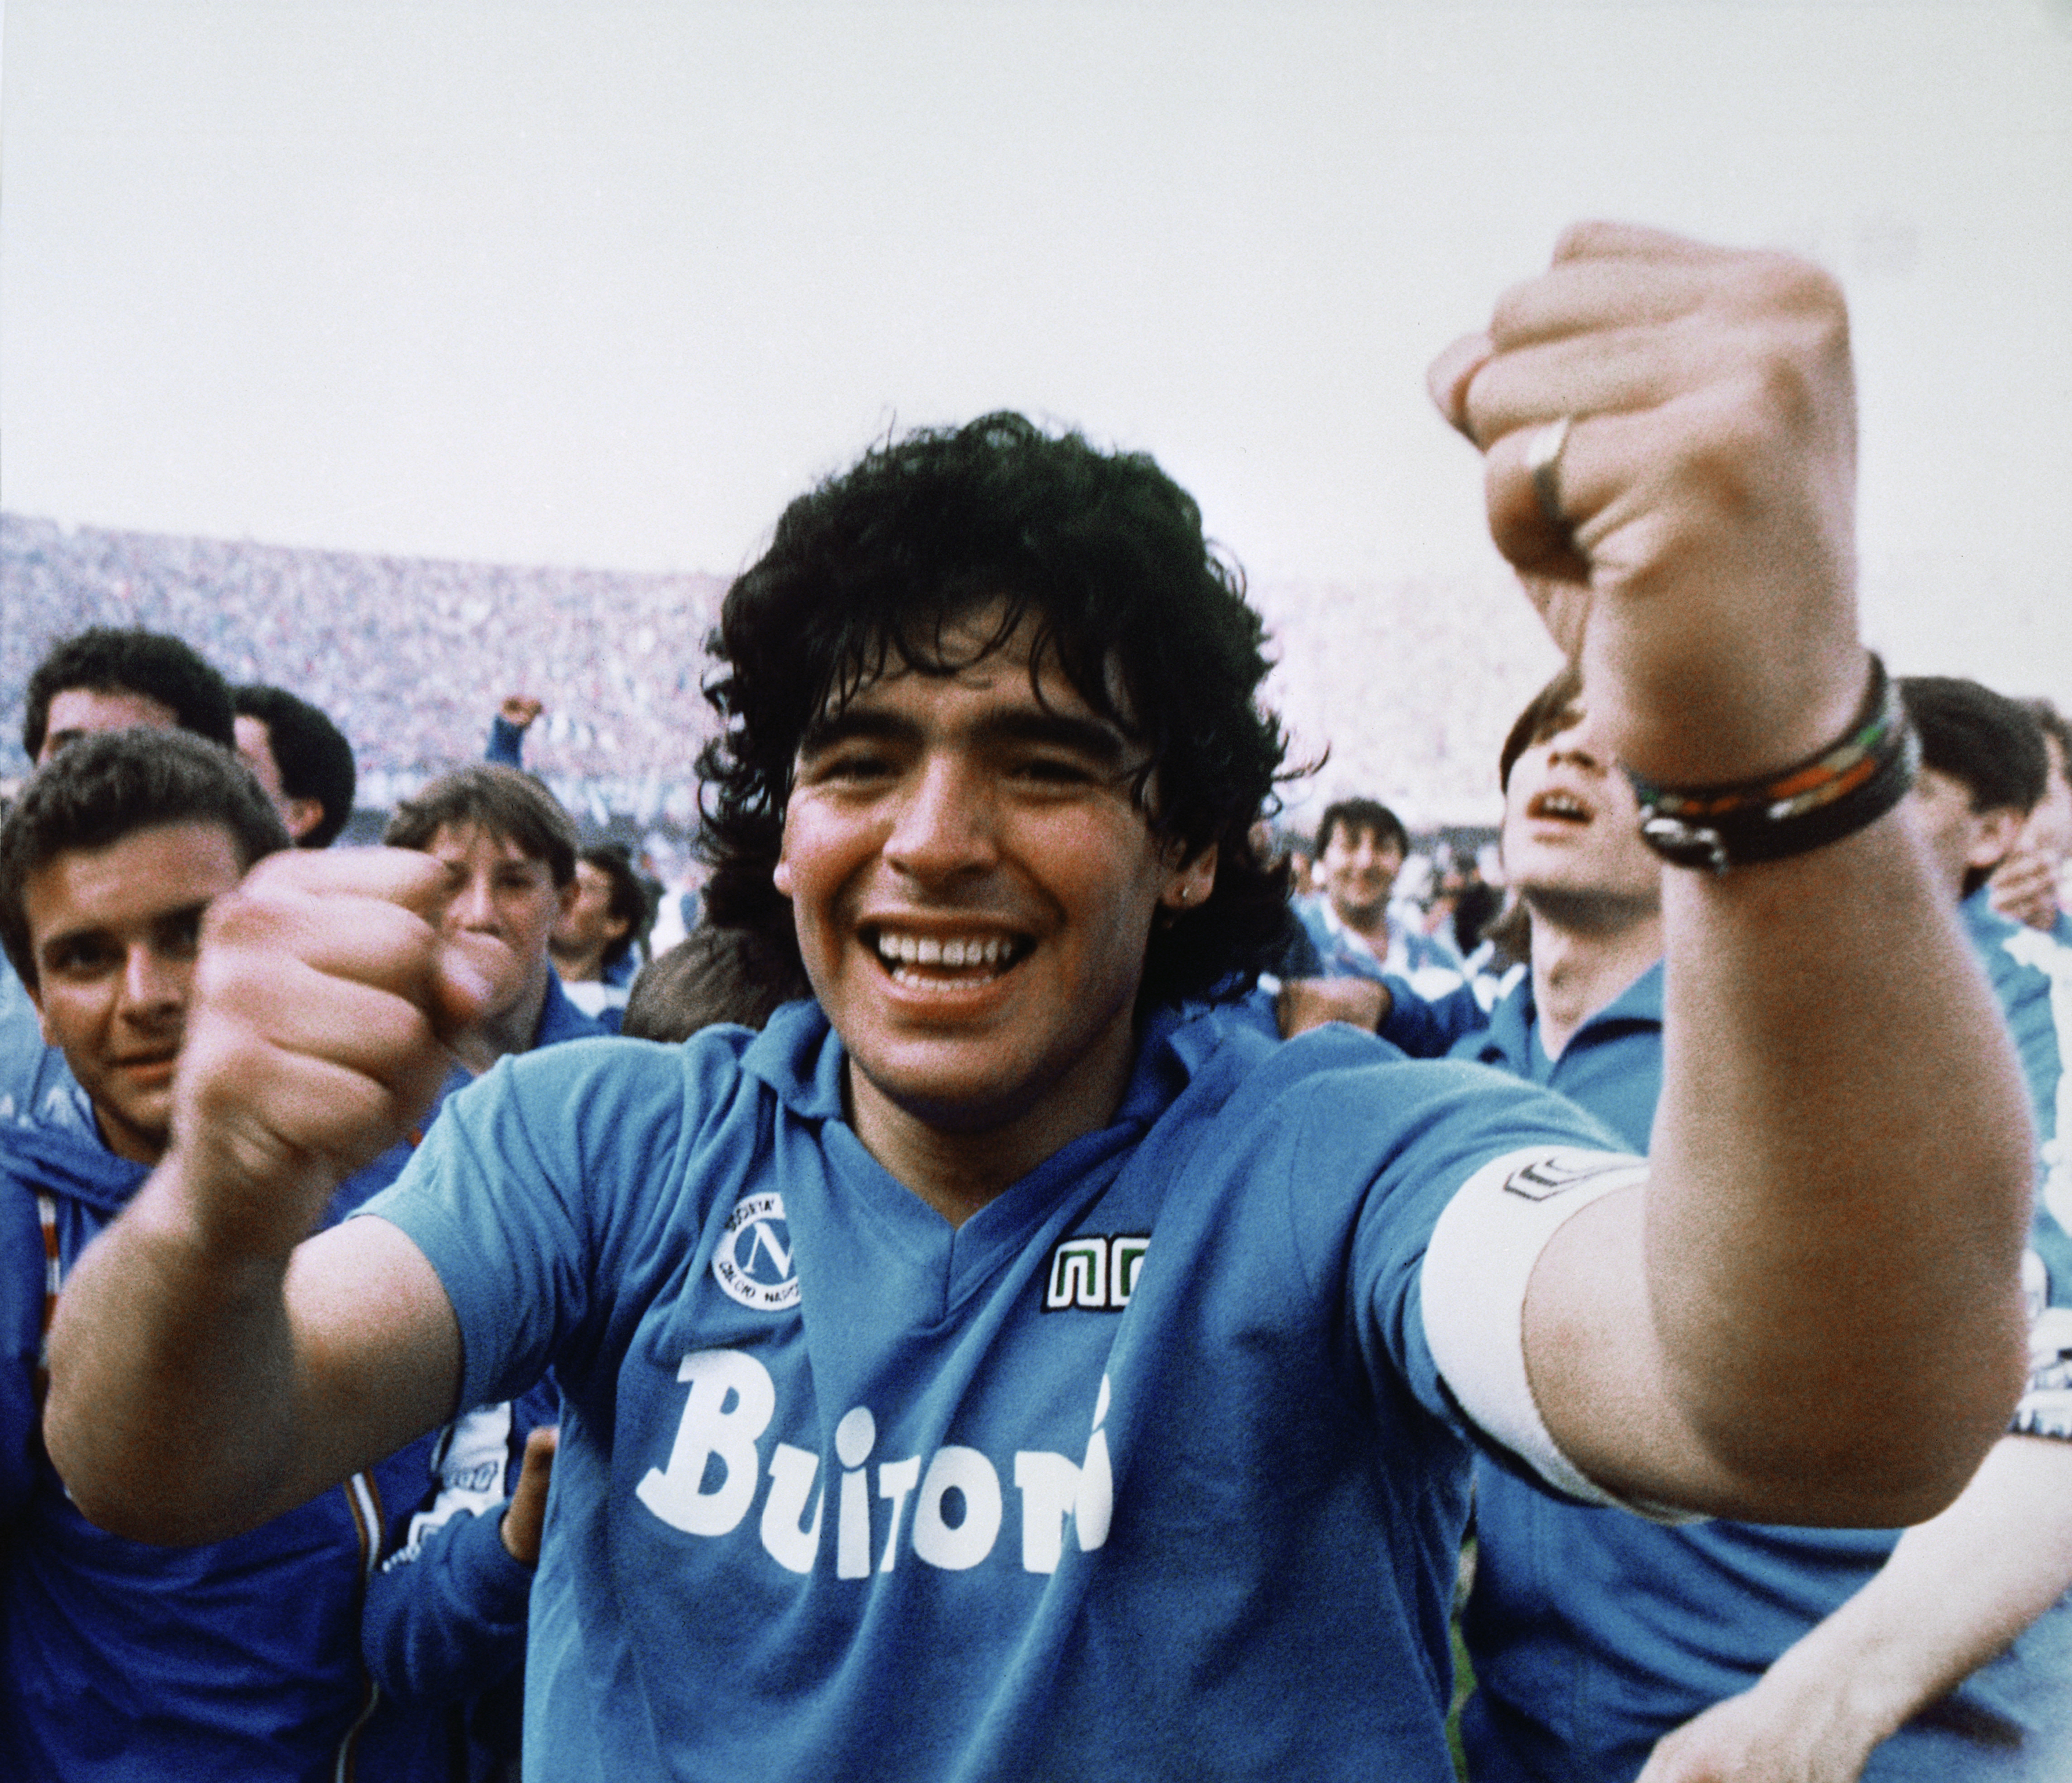 Every trophy Diego Maradona won for club and country